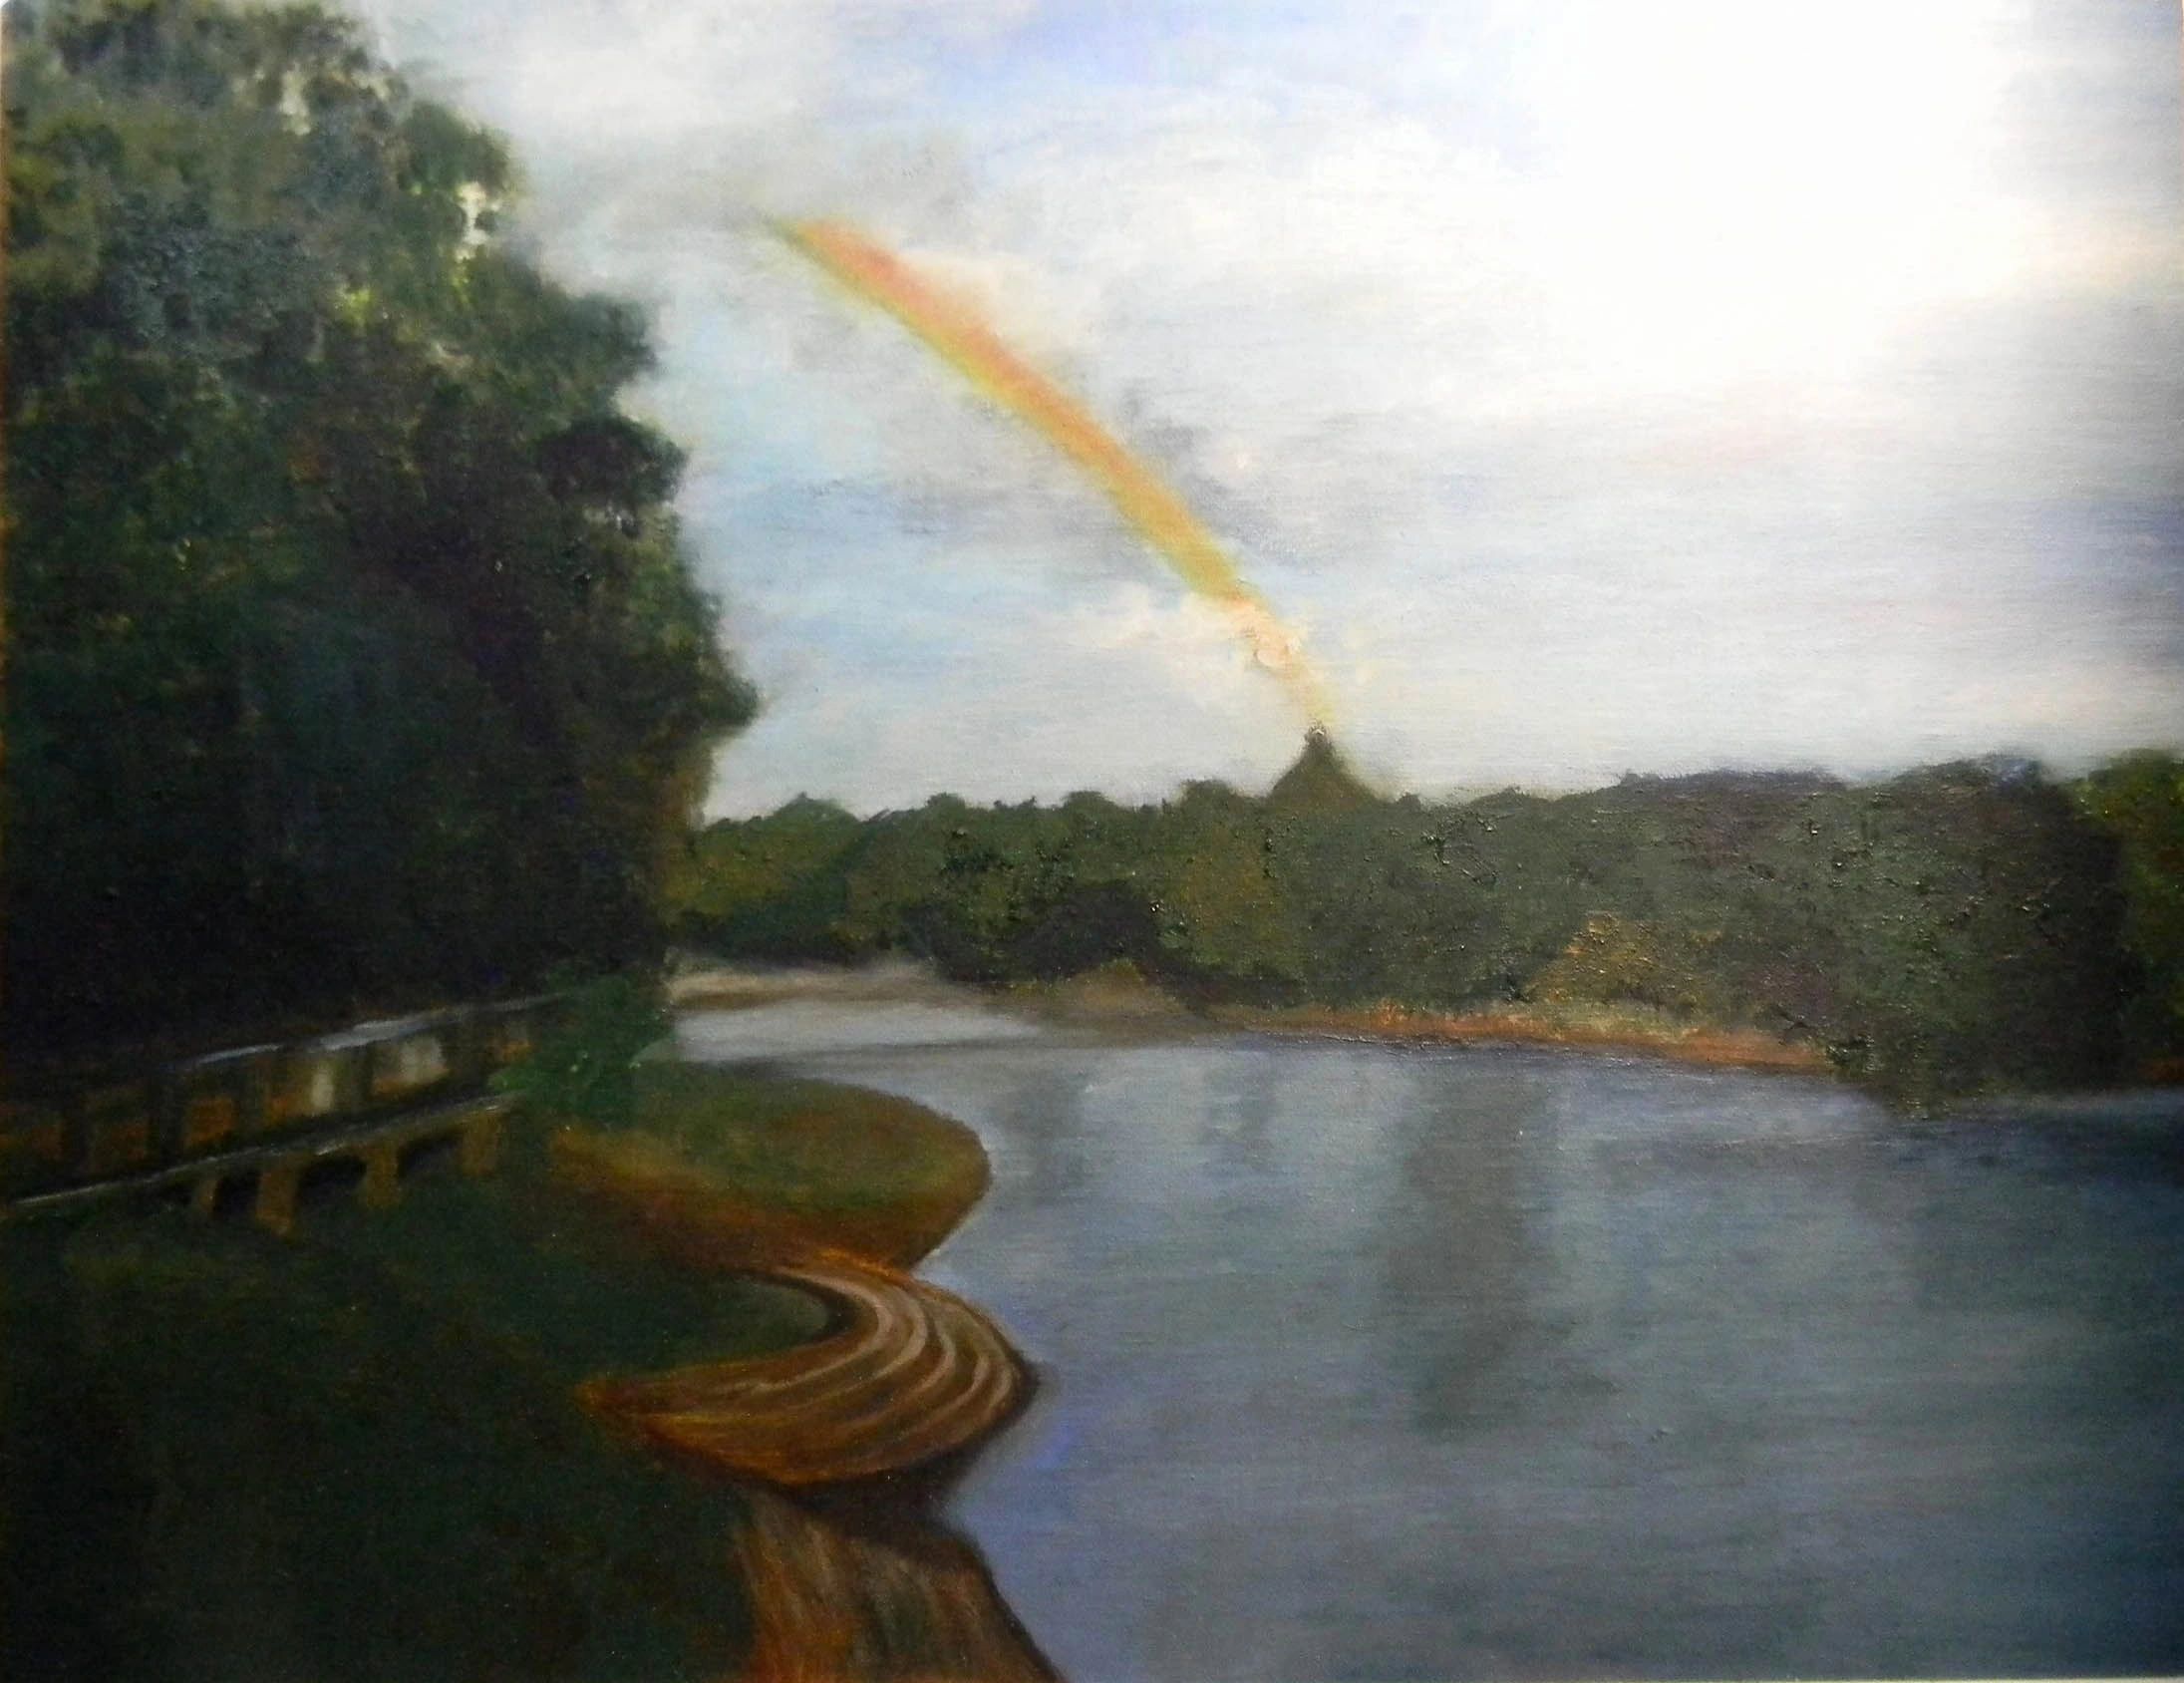 Rainbow over a calm lake; Oil on canvas; 9 H x 11 W inches; Price = $450